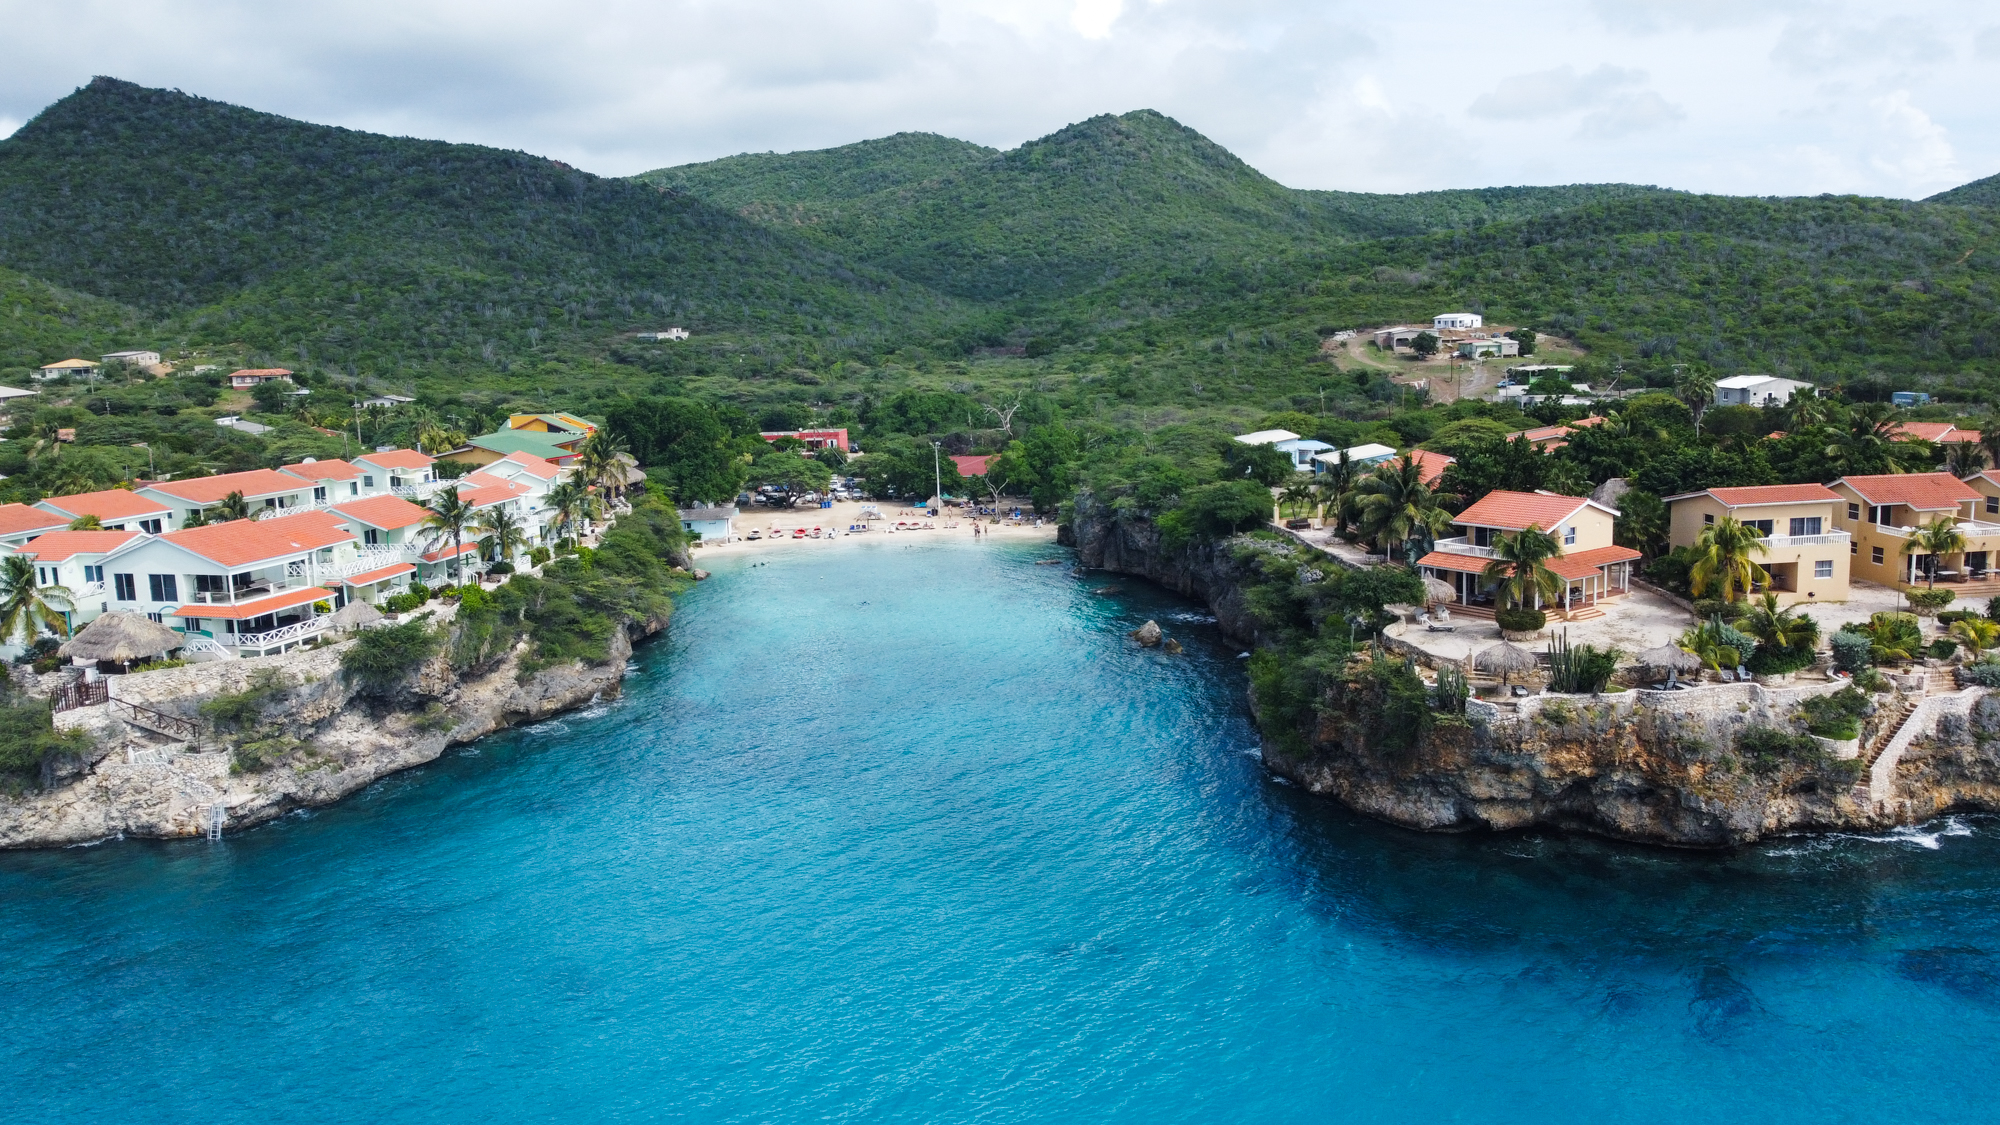 Aerial view of Playa Lagun, Curacao showing a bustling beach nestled between rugged cliffs and turquoise waters